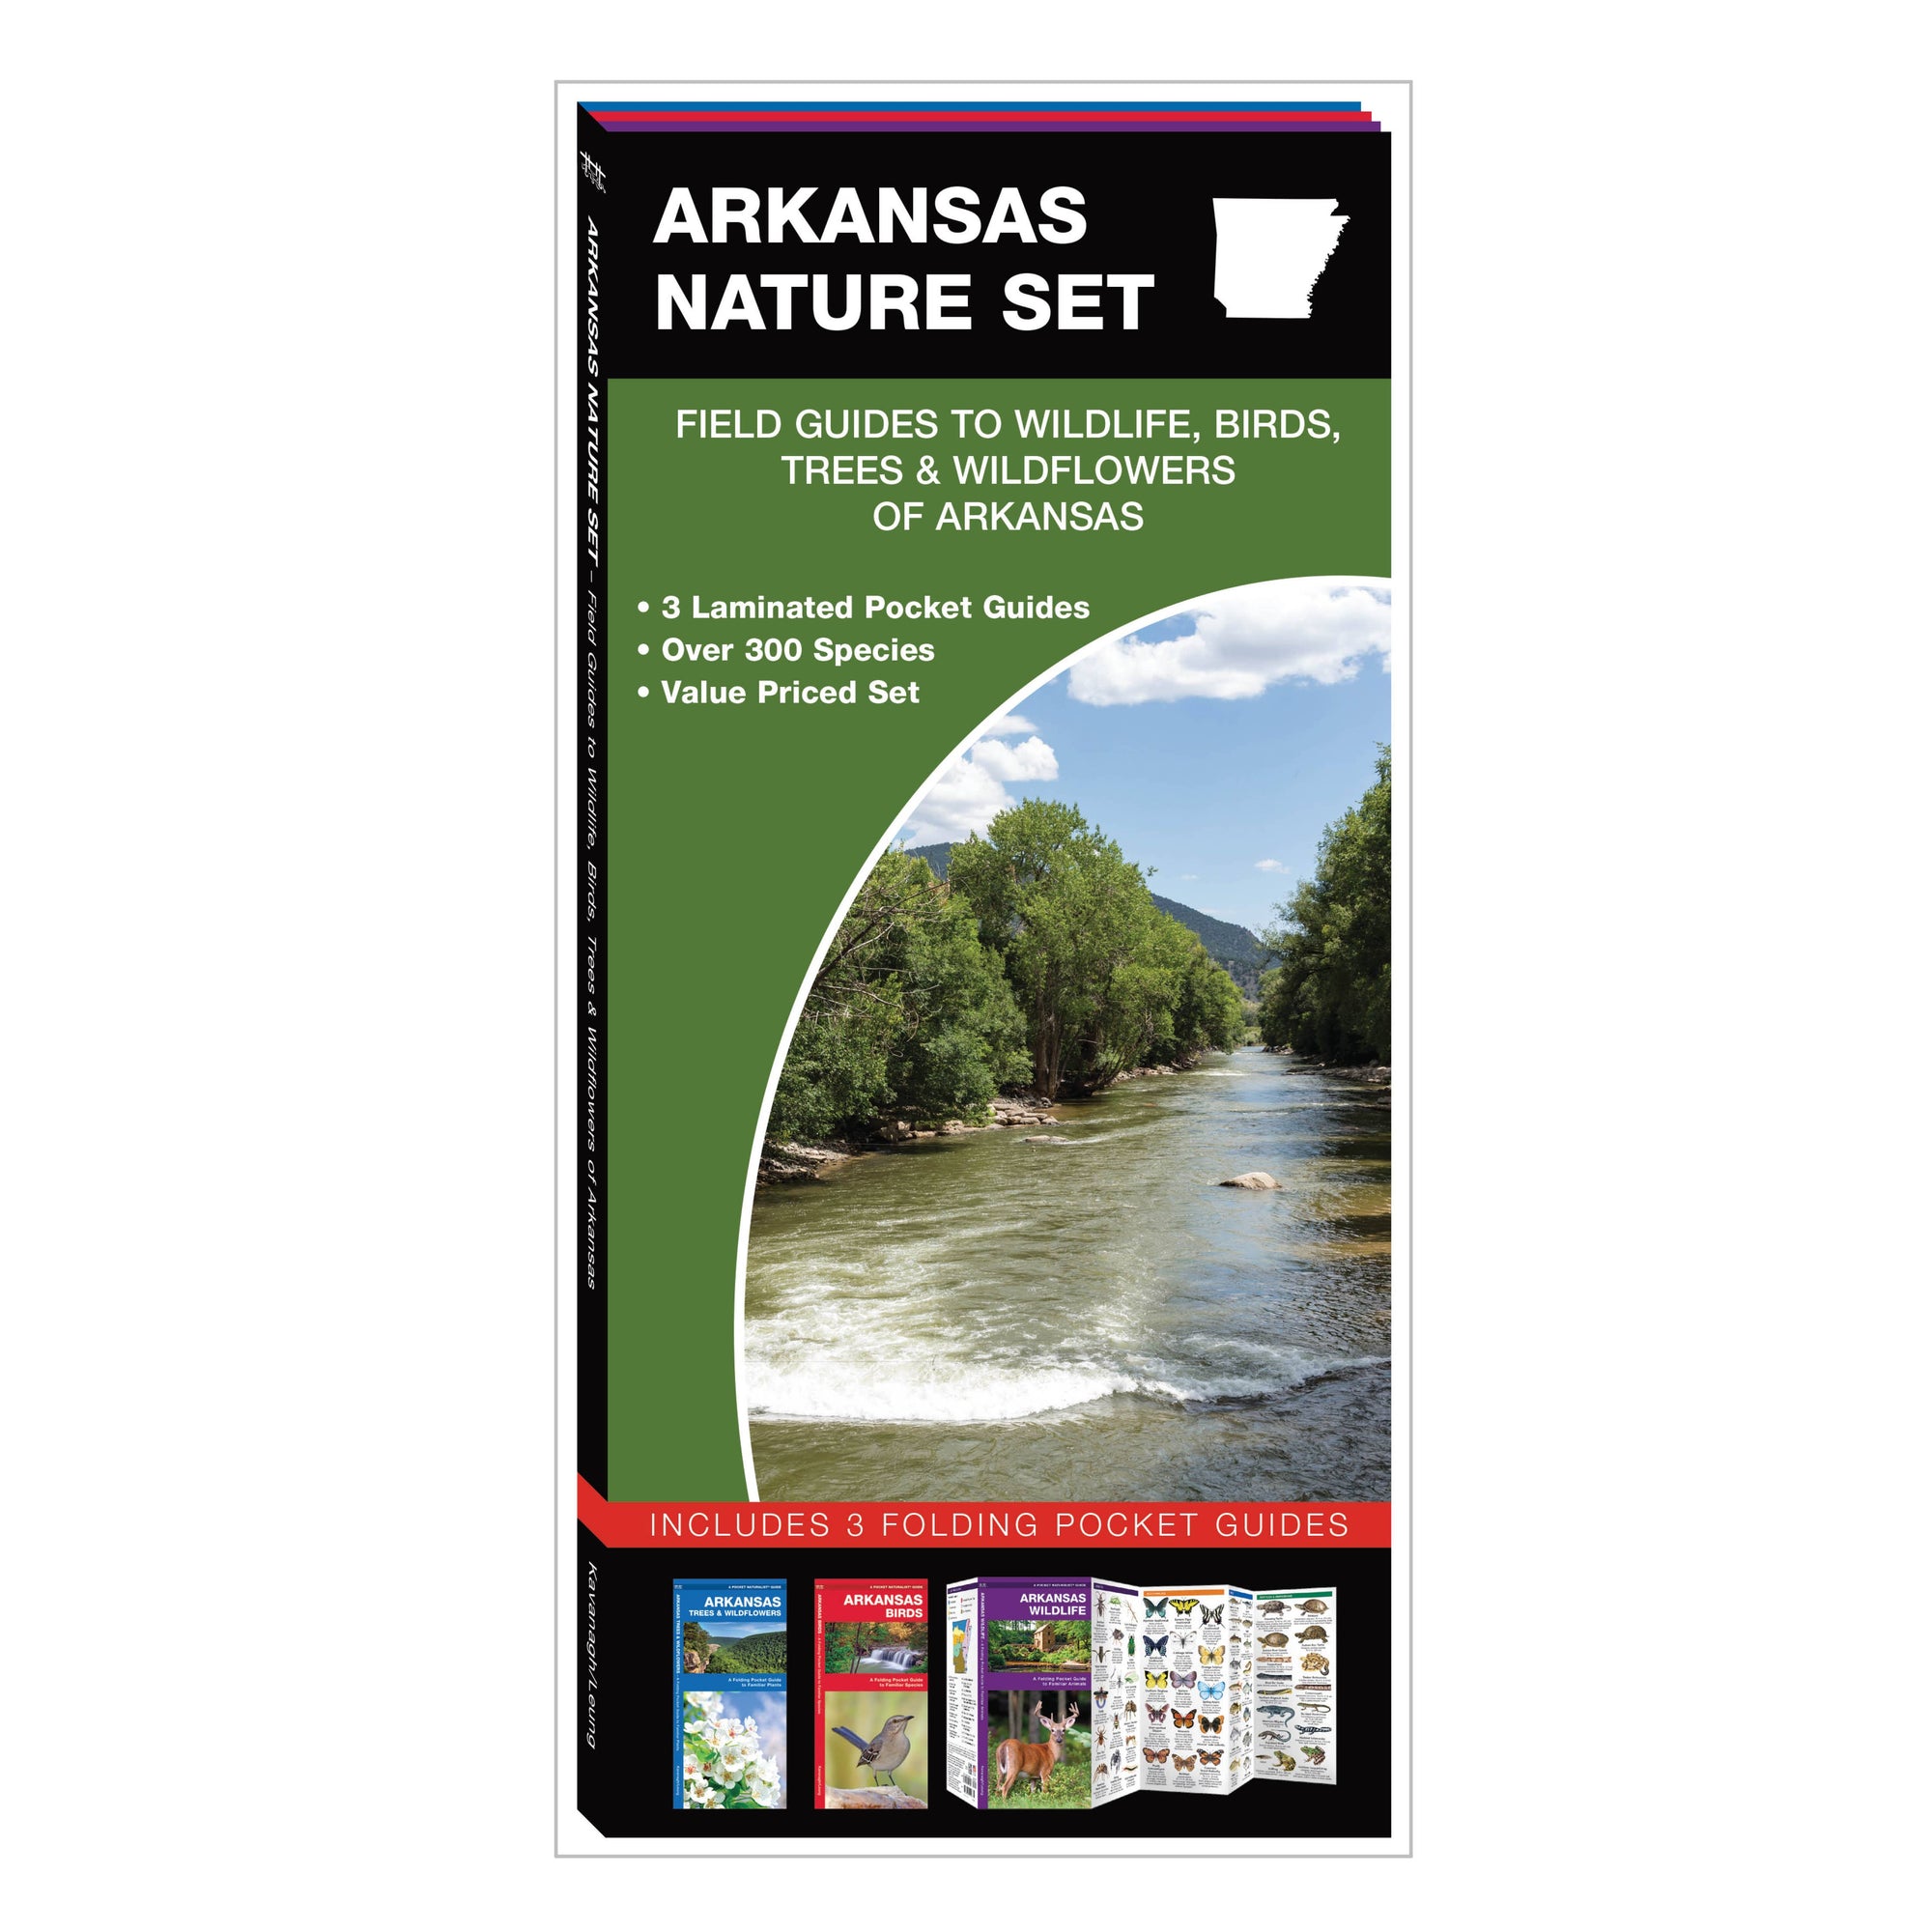 Advertisement for Arkansas Nature Set featuring images of birds, trees, and wildflowers with a background photo of a river landscape. Includes details of 3 laminated pocket guides showcasing birds, wildflowers.